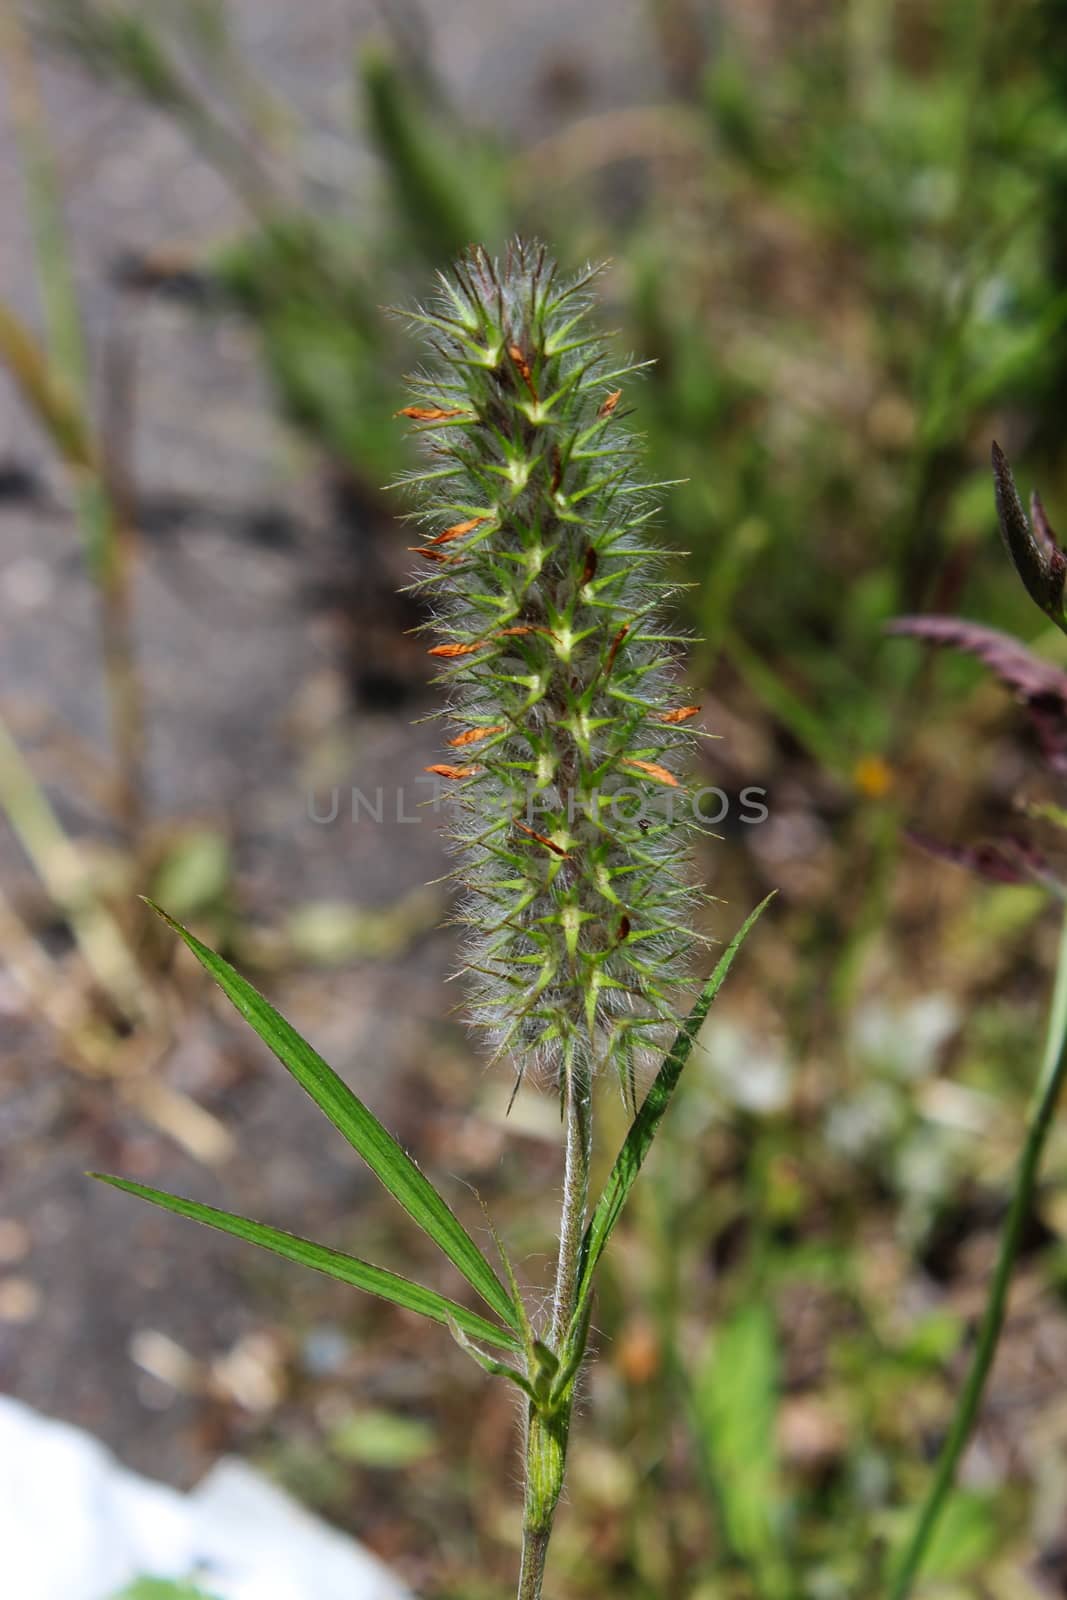 Close up of weed with thorns. Probably the Poaceae family. Beja, Portugal.